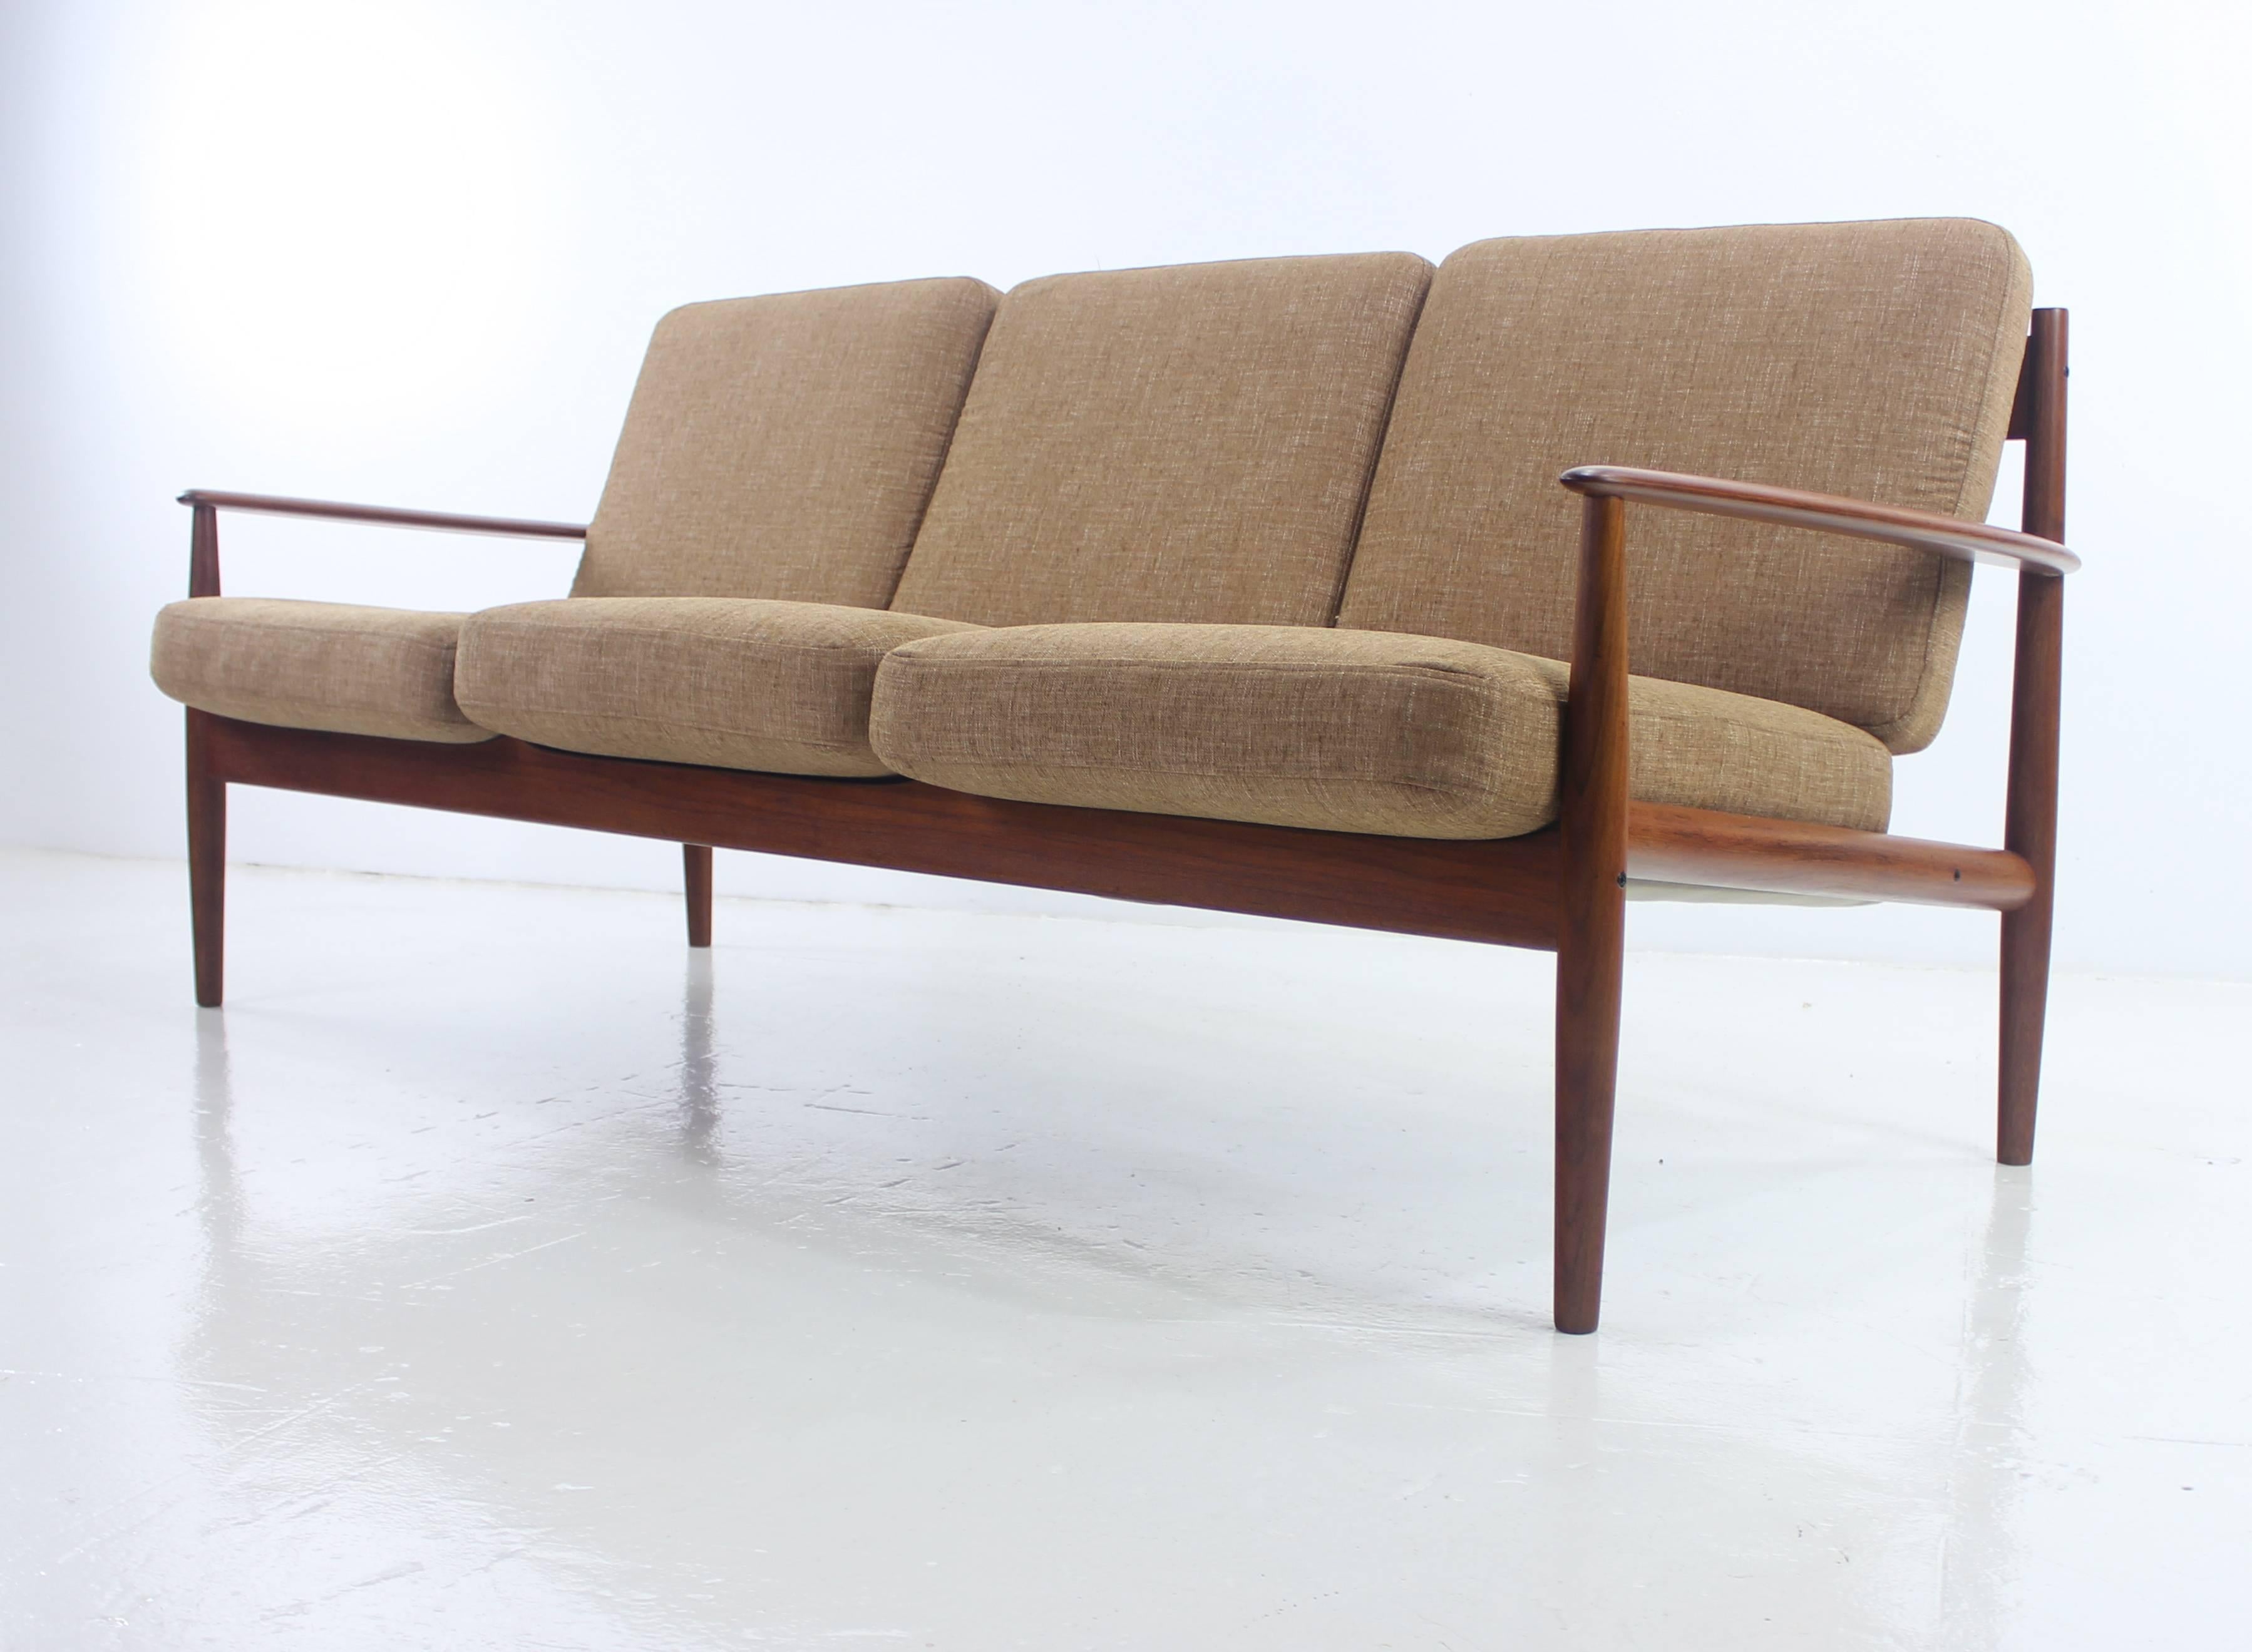 Danish modern three place sofa designed by Grete Jalk.
France & Son, importer.
Teak frame with beautiful style and craftsmanship from every angle.
Original metal inner cushions with new foam provide maximum comfort.
Six cushions newly